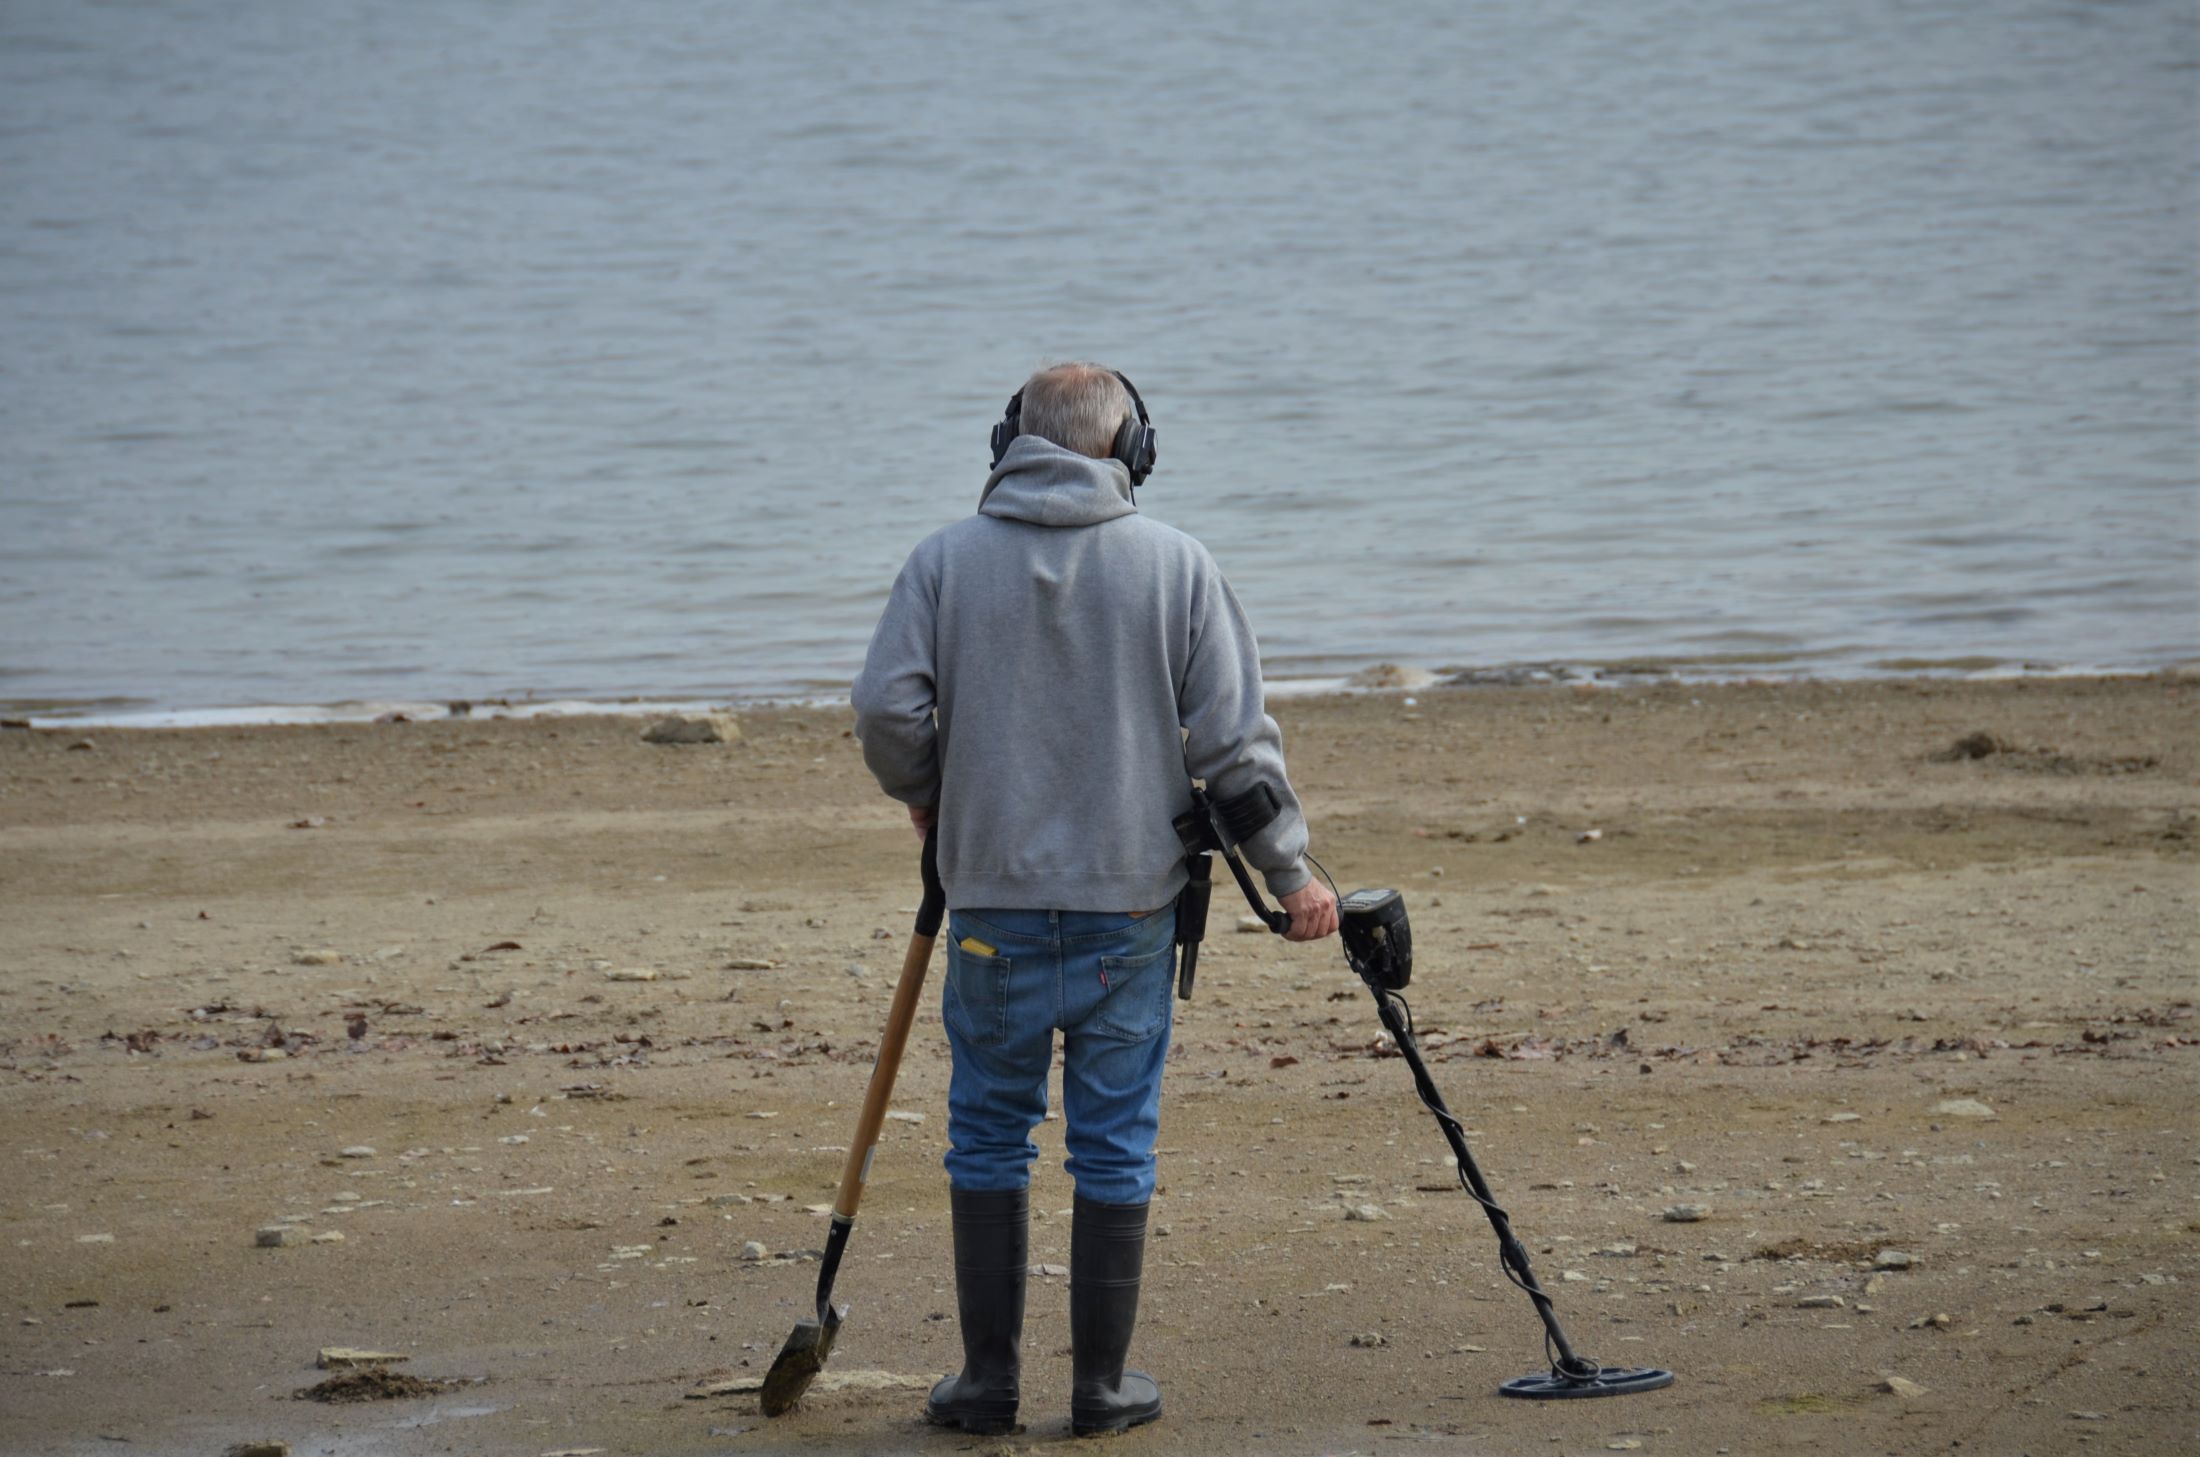 An image of a man on the beach with a shovel and a metal detector.